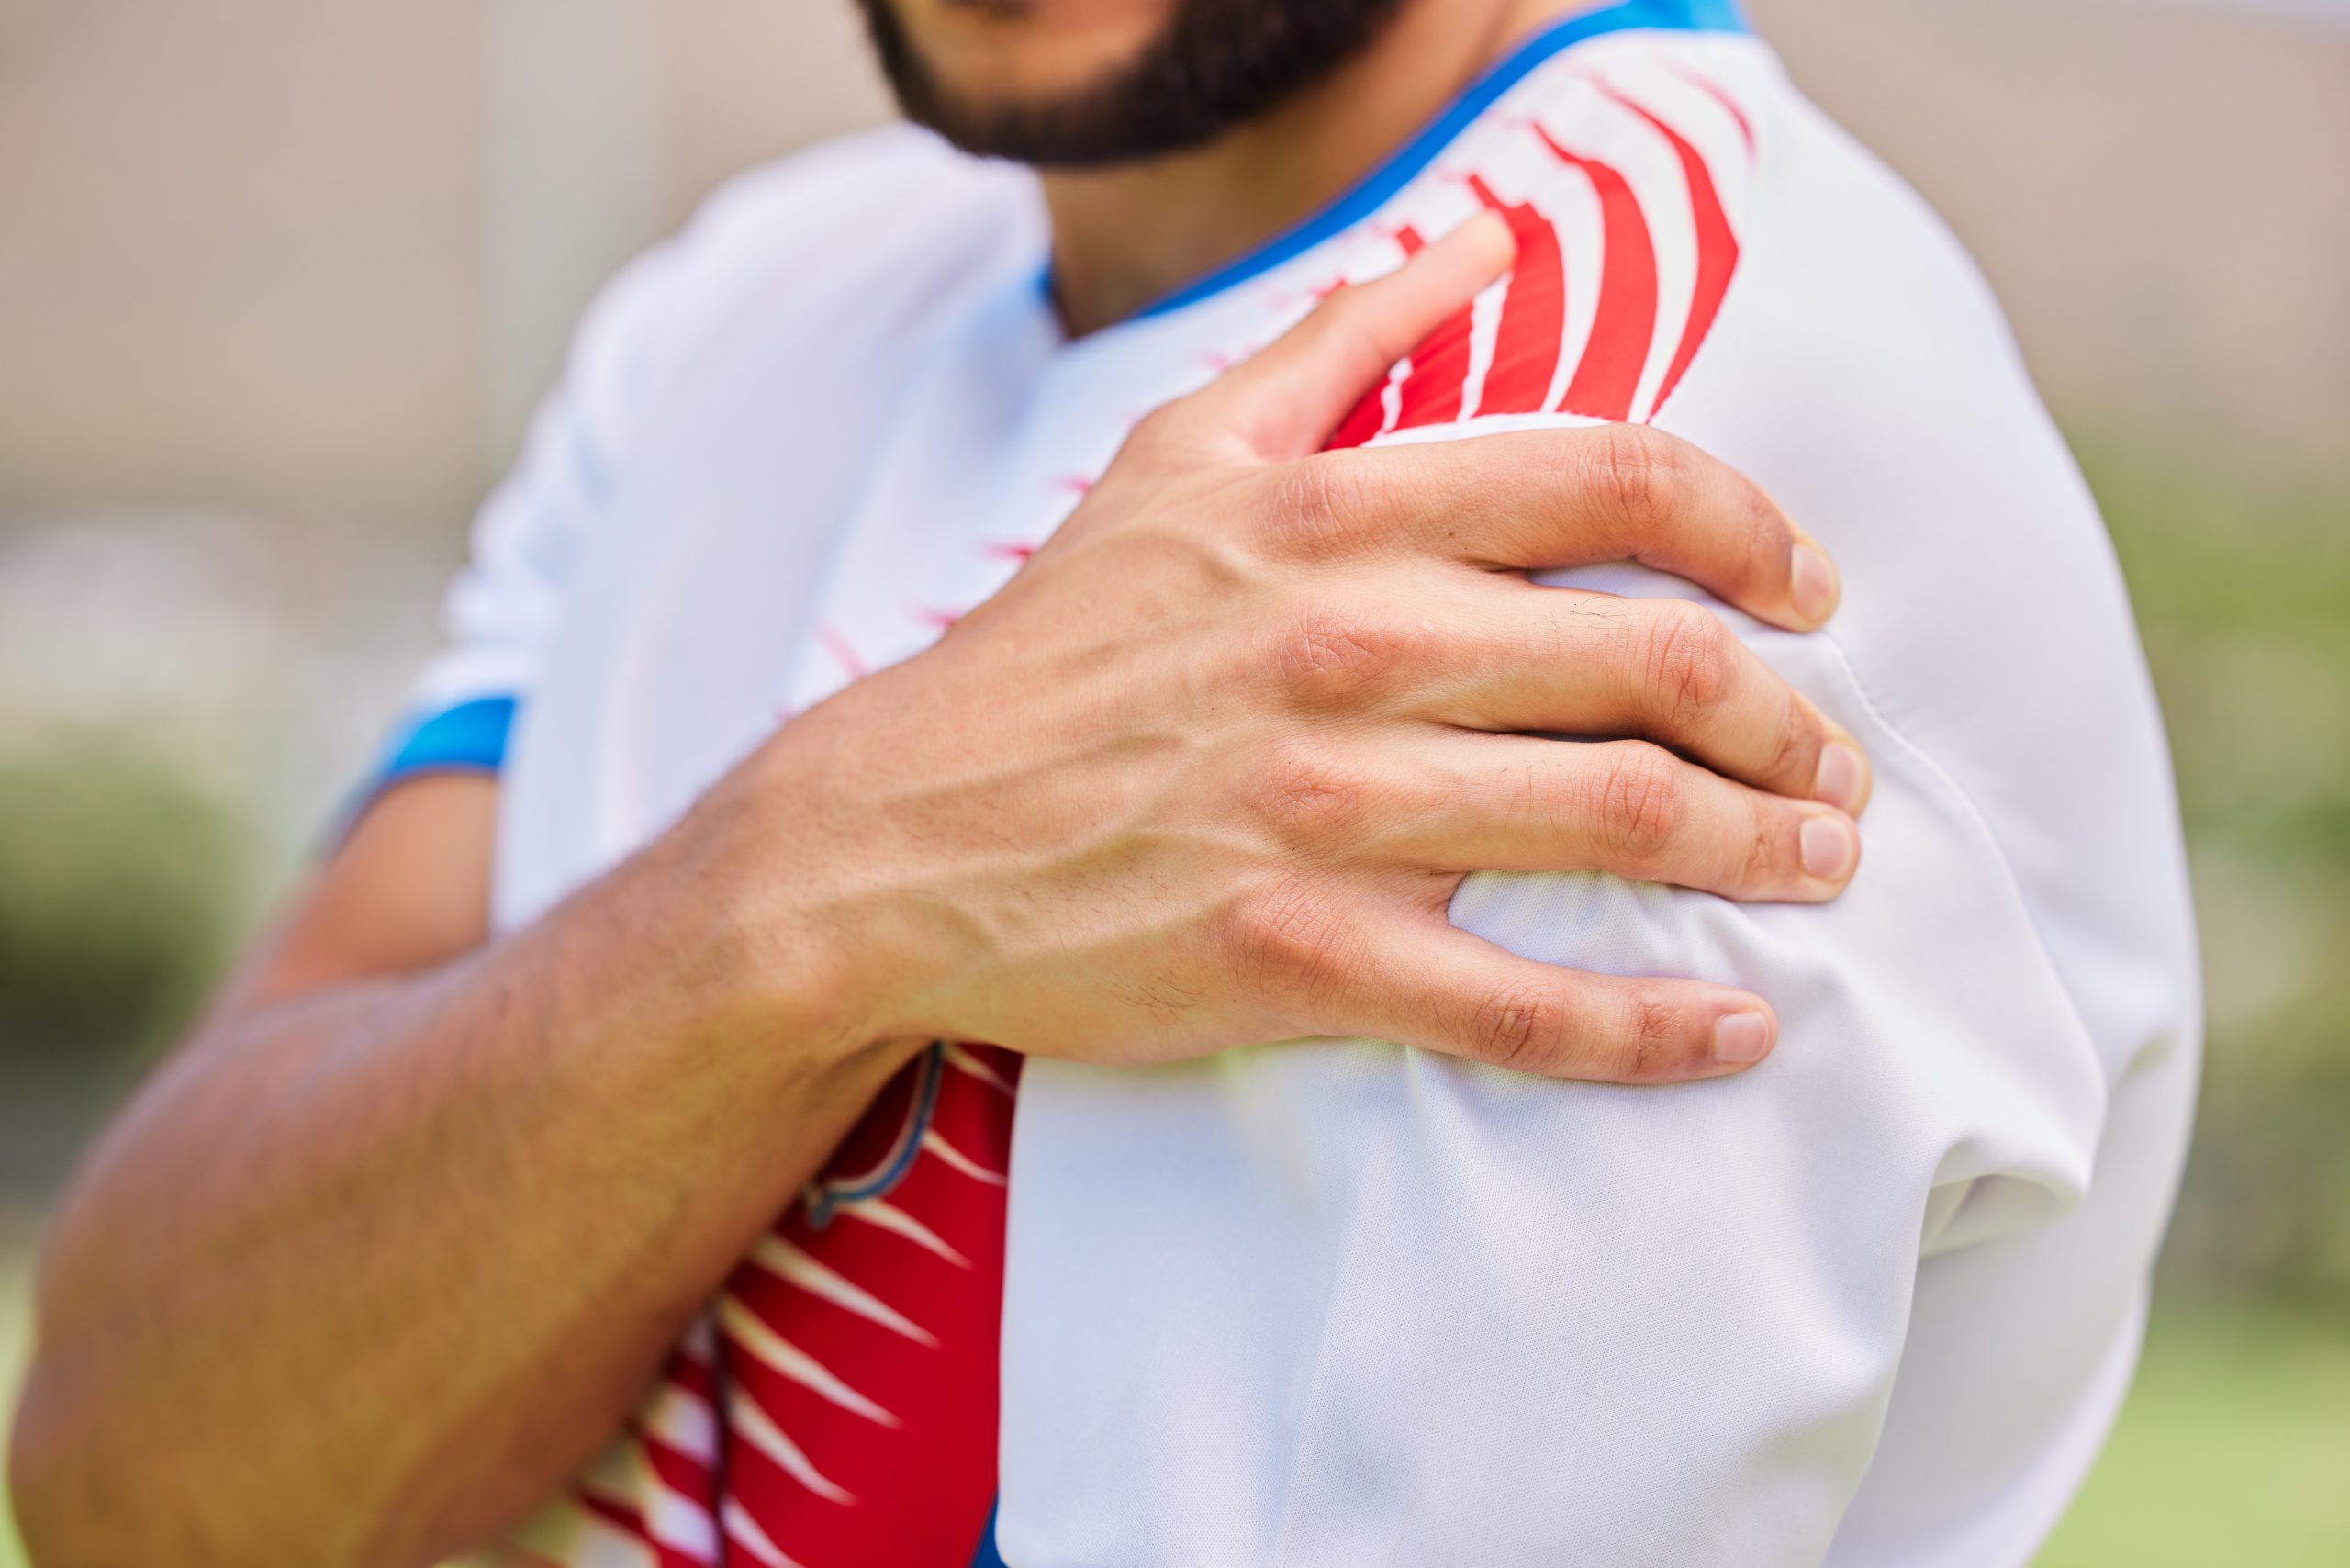 Sports, soccer and hands of man with shoulder pain from training game, soccer field accident or fitness exercise workout. Athlete emergency, injury problem and hurt football player with muscle strain.